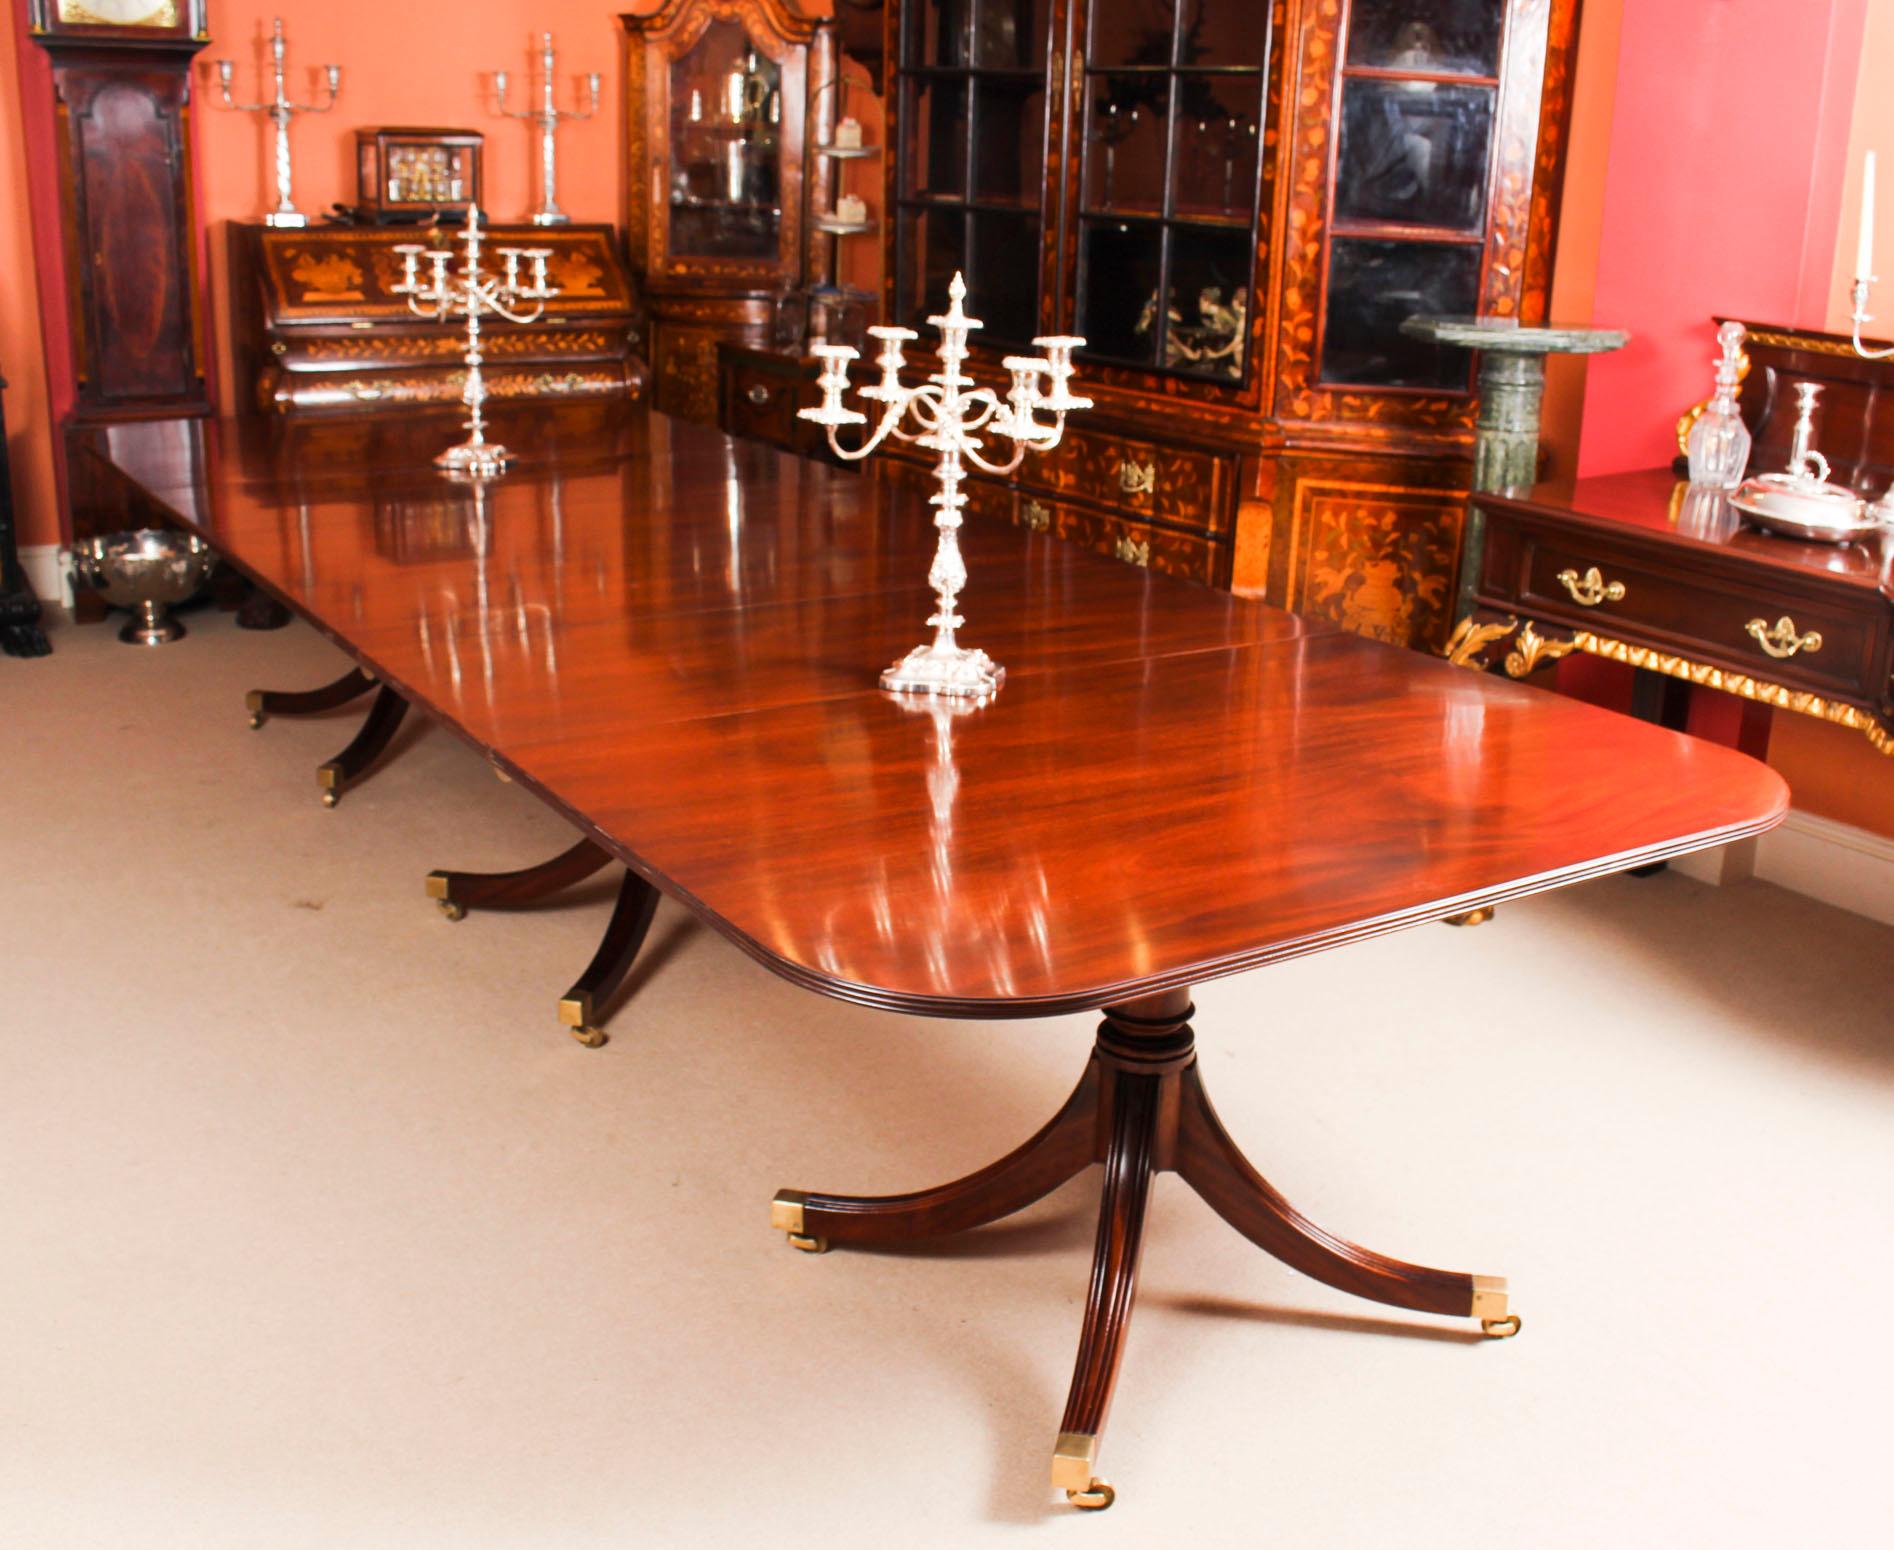 This is a fabulous Vintage Regency style dining table by the master cabinet maker William Tillman, circa 1980 in date.

It is made of stunning solid flame mahogany and is raised on three 